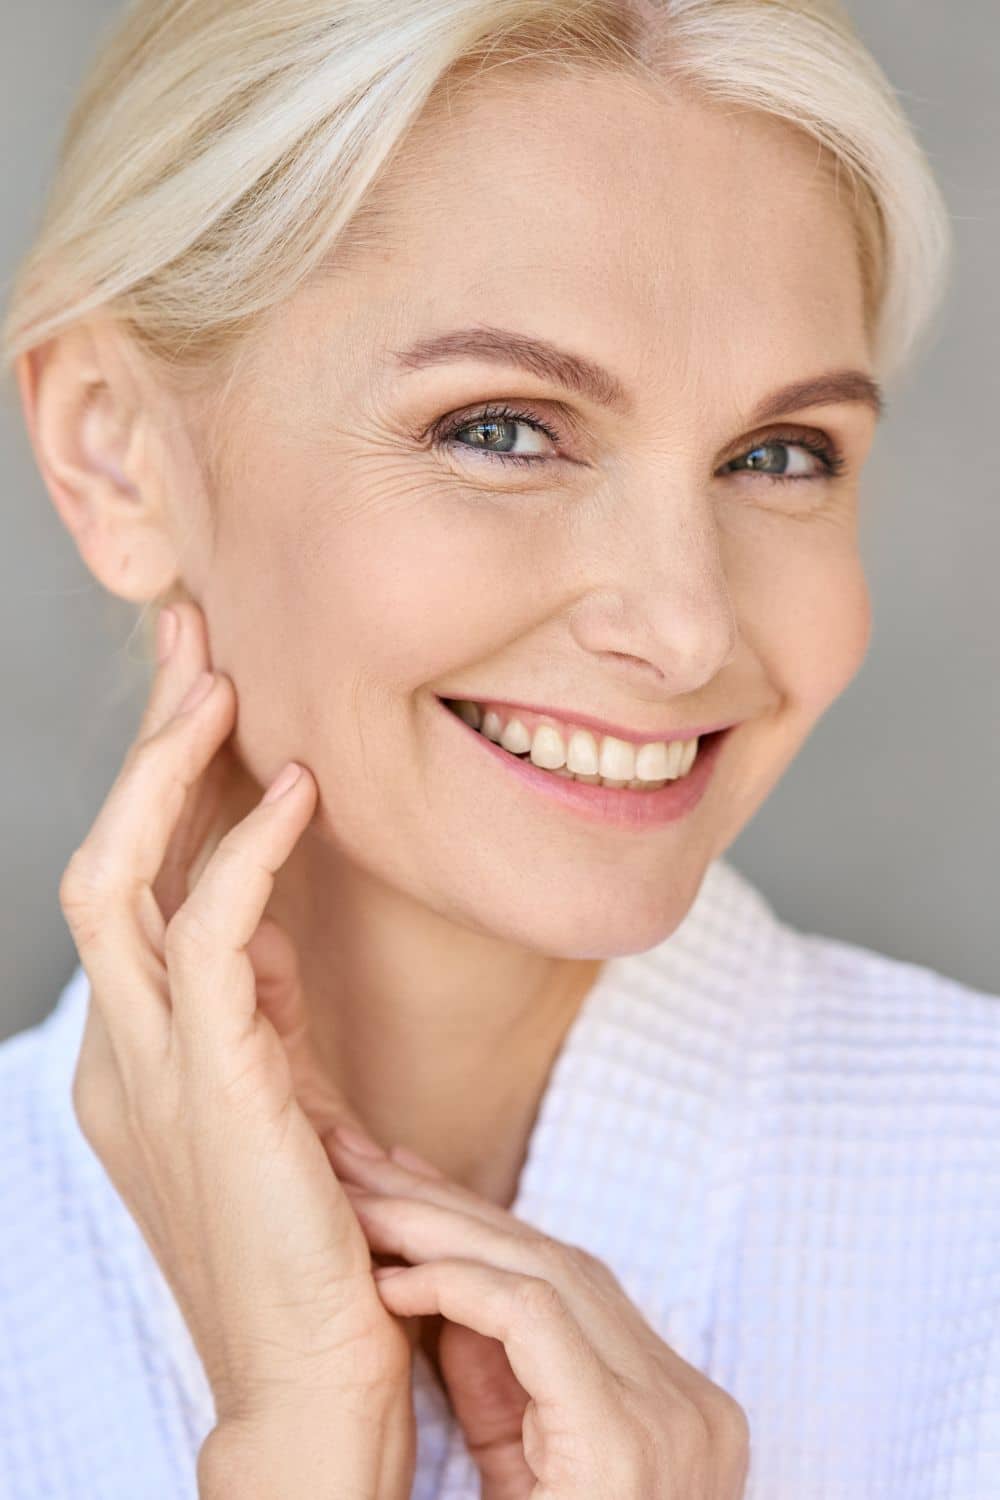 Anti-Aging Products These Are The Ones That Really Work